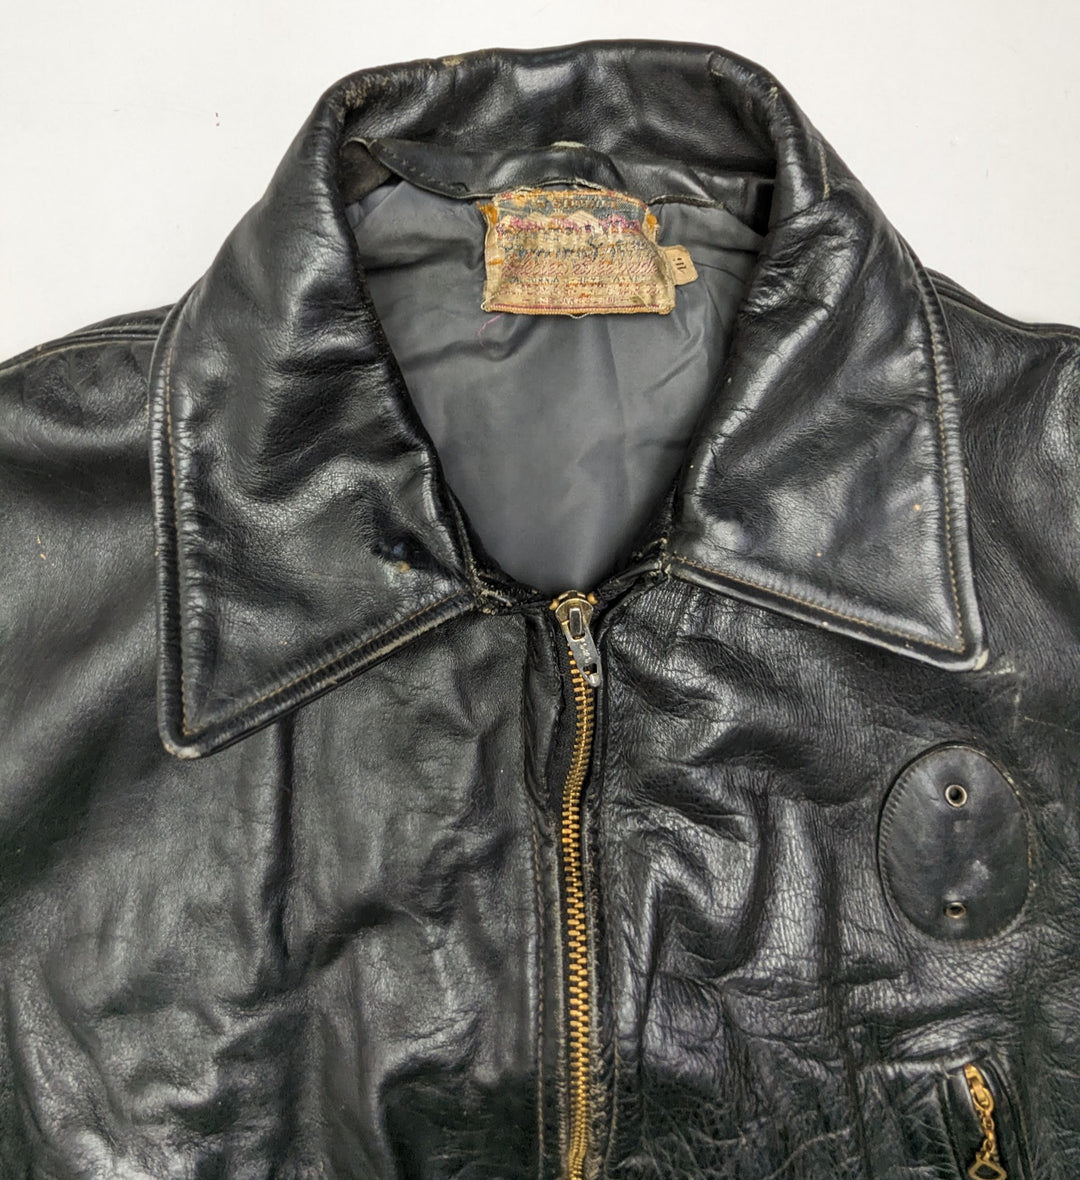 1950s Motorcycle Leather Jacket 1 pc 4 lbs E0122219-05 - Raghouse